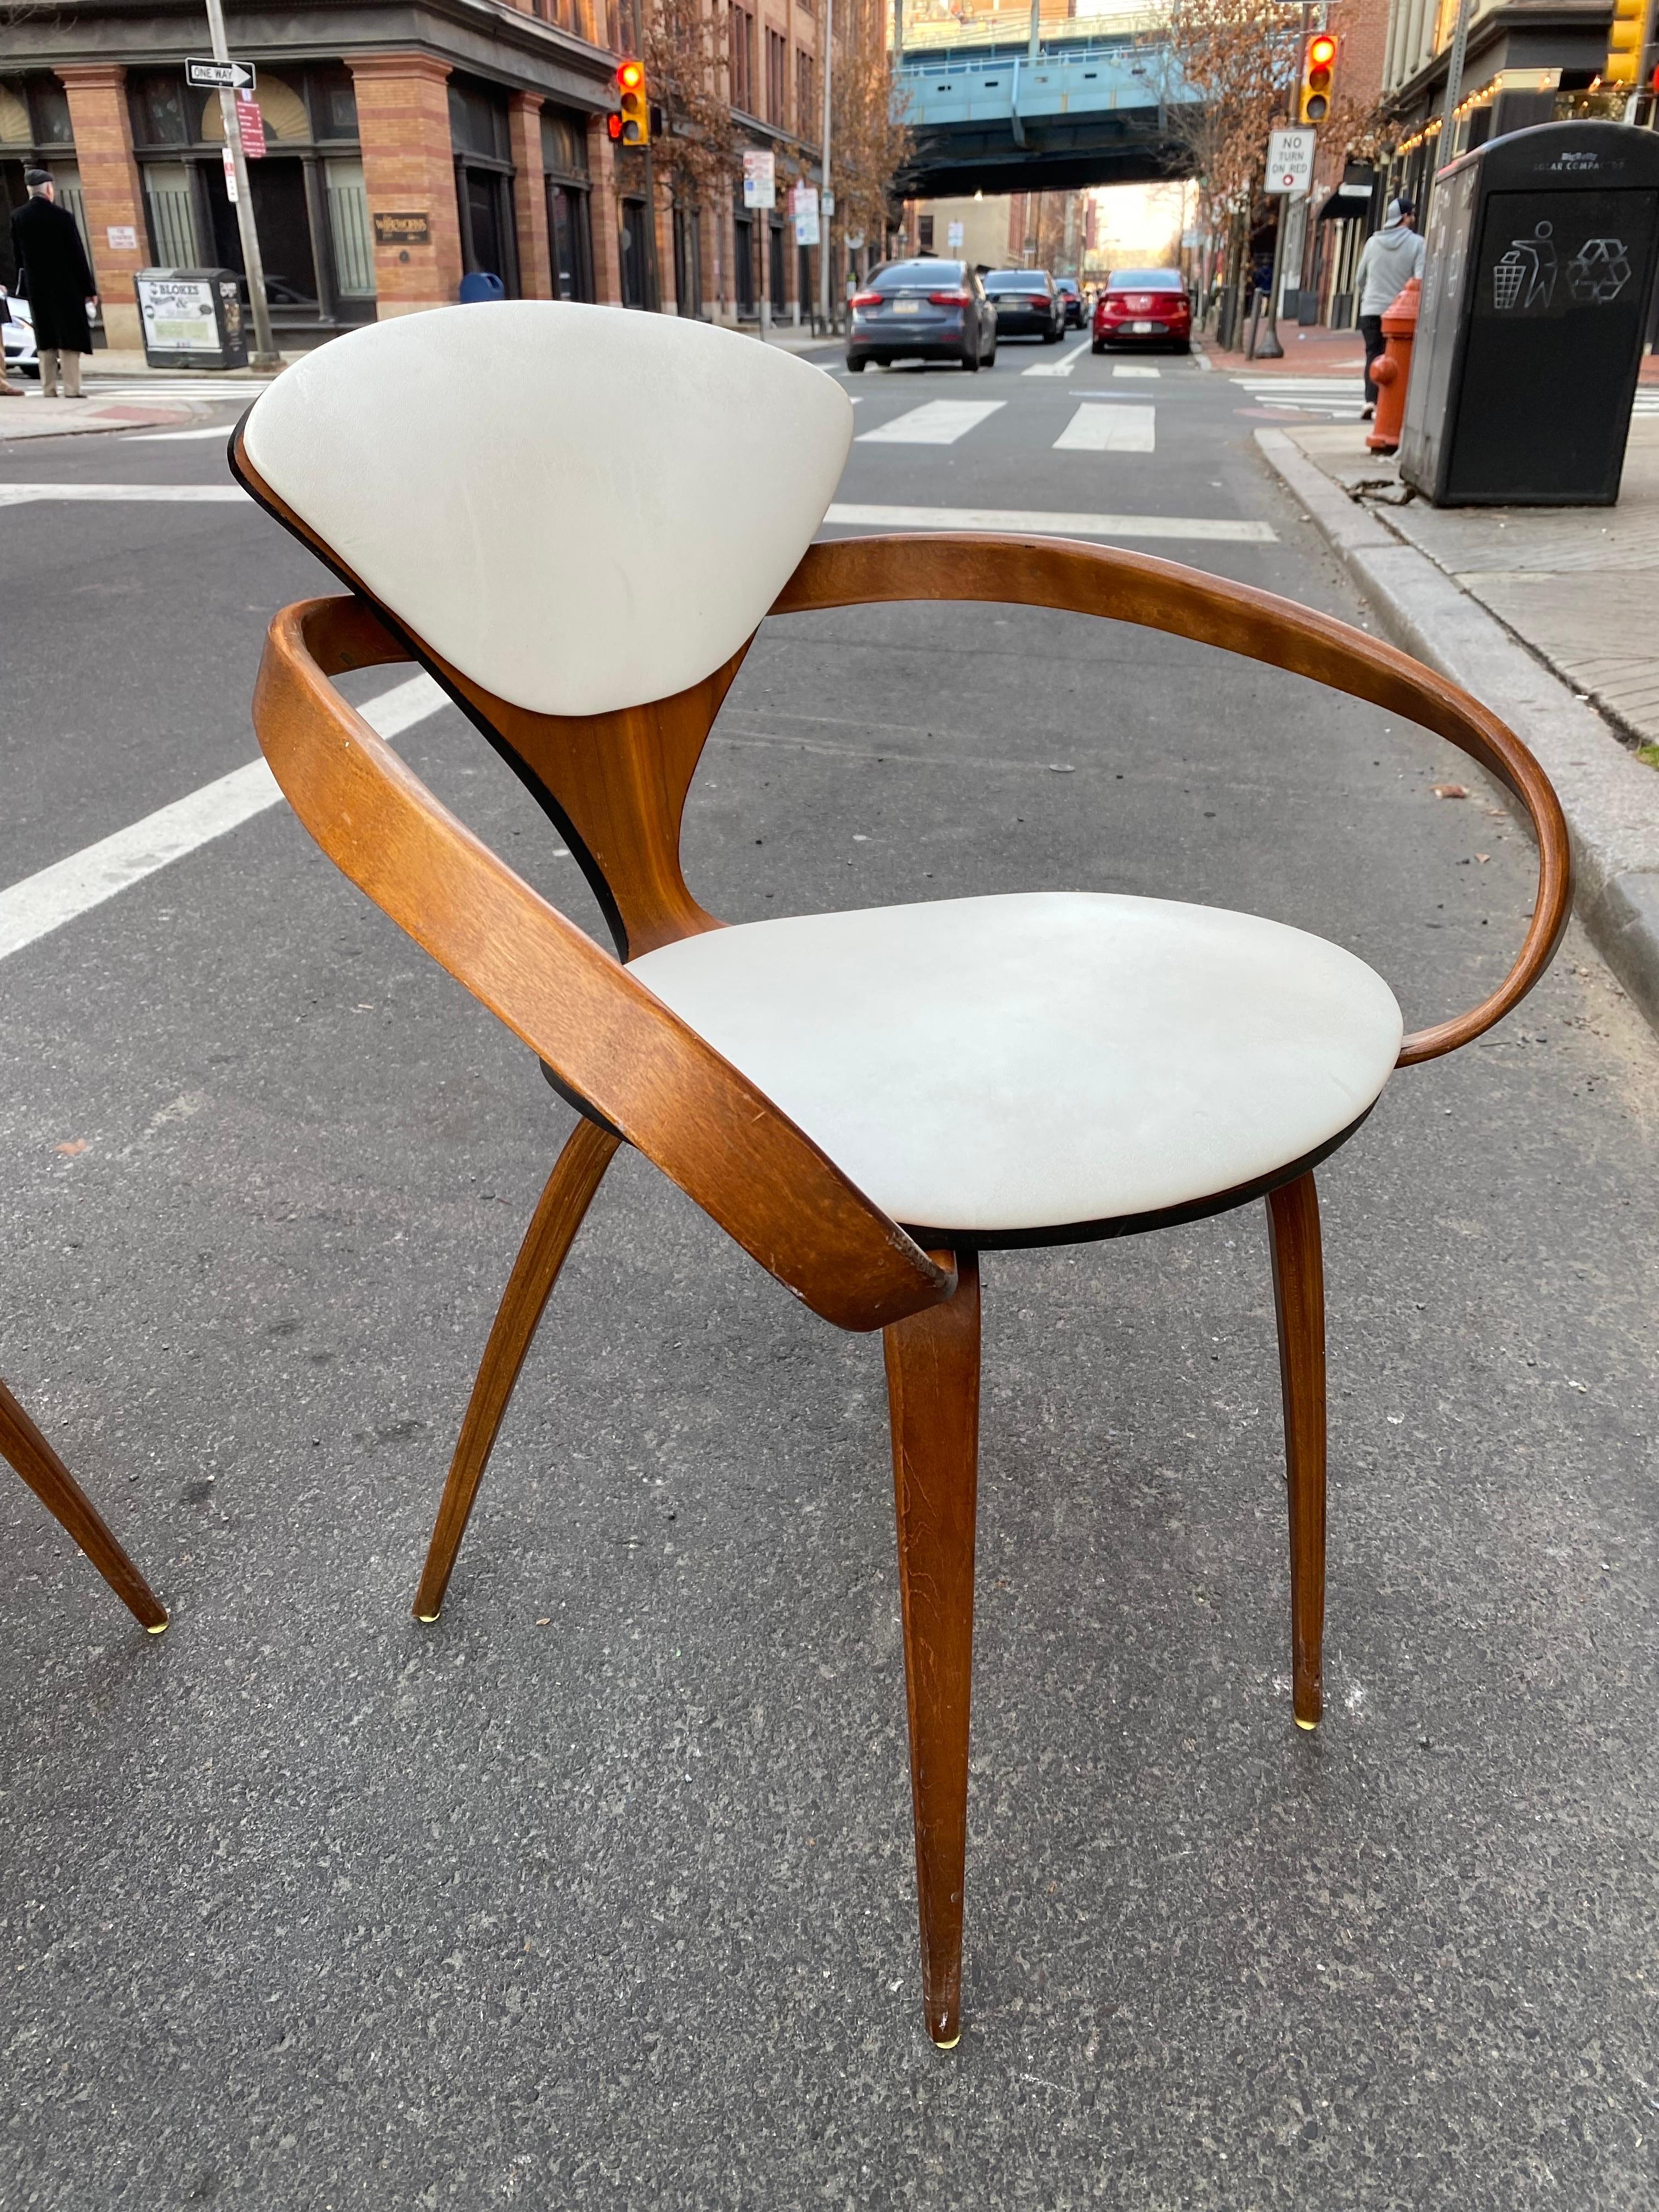 Pair of very Original Norman Cherner Pretzel armchairs. Chairs in nice shape, original vinyl seat shows a little wear but chairs are very solid! Iconic Mid-Century Design. Chairs retain their labels to underside.